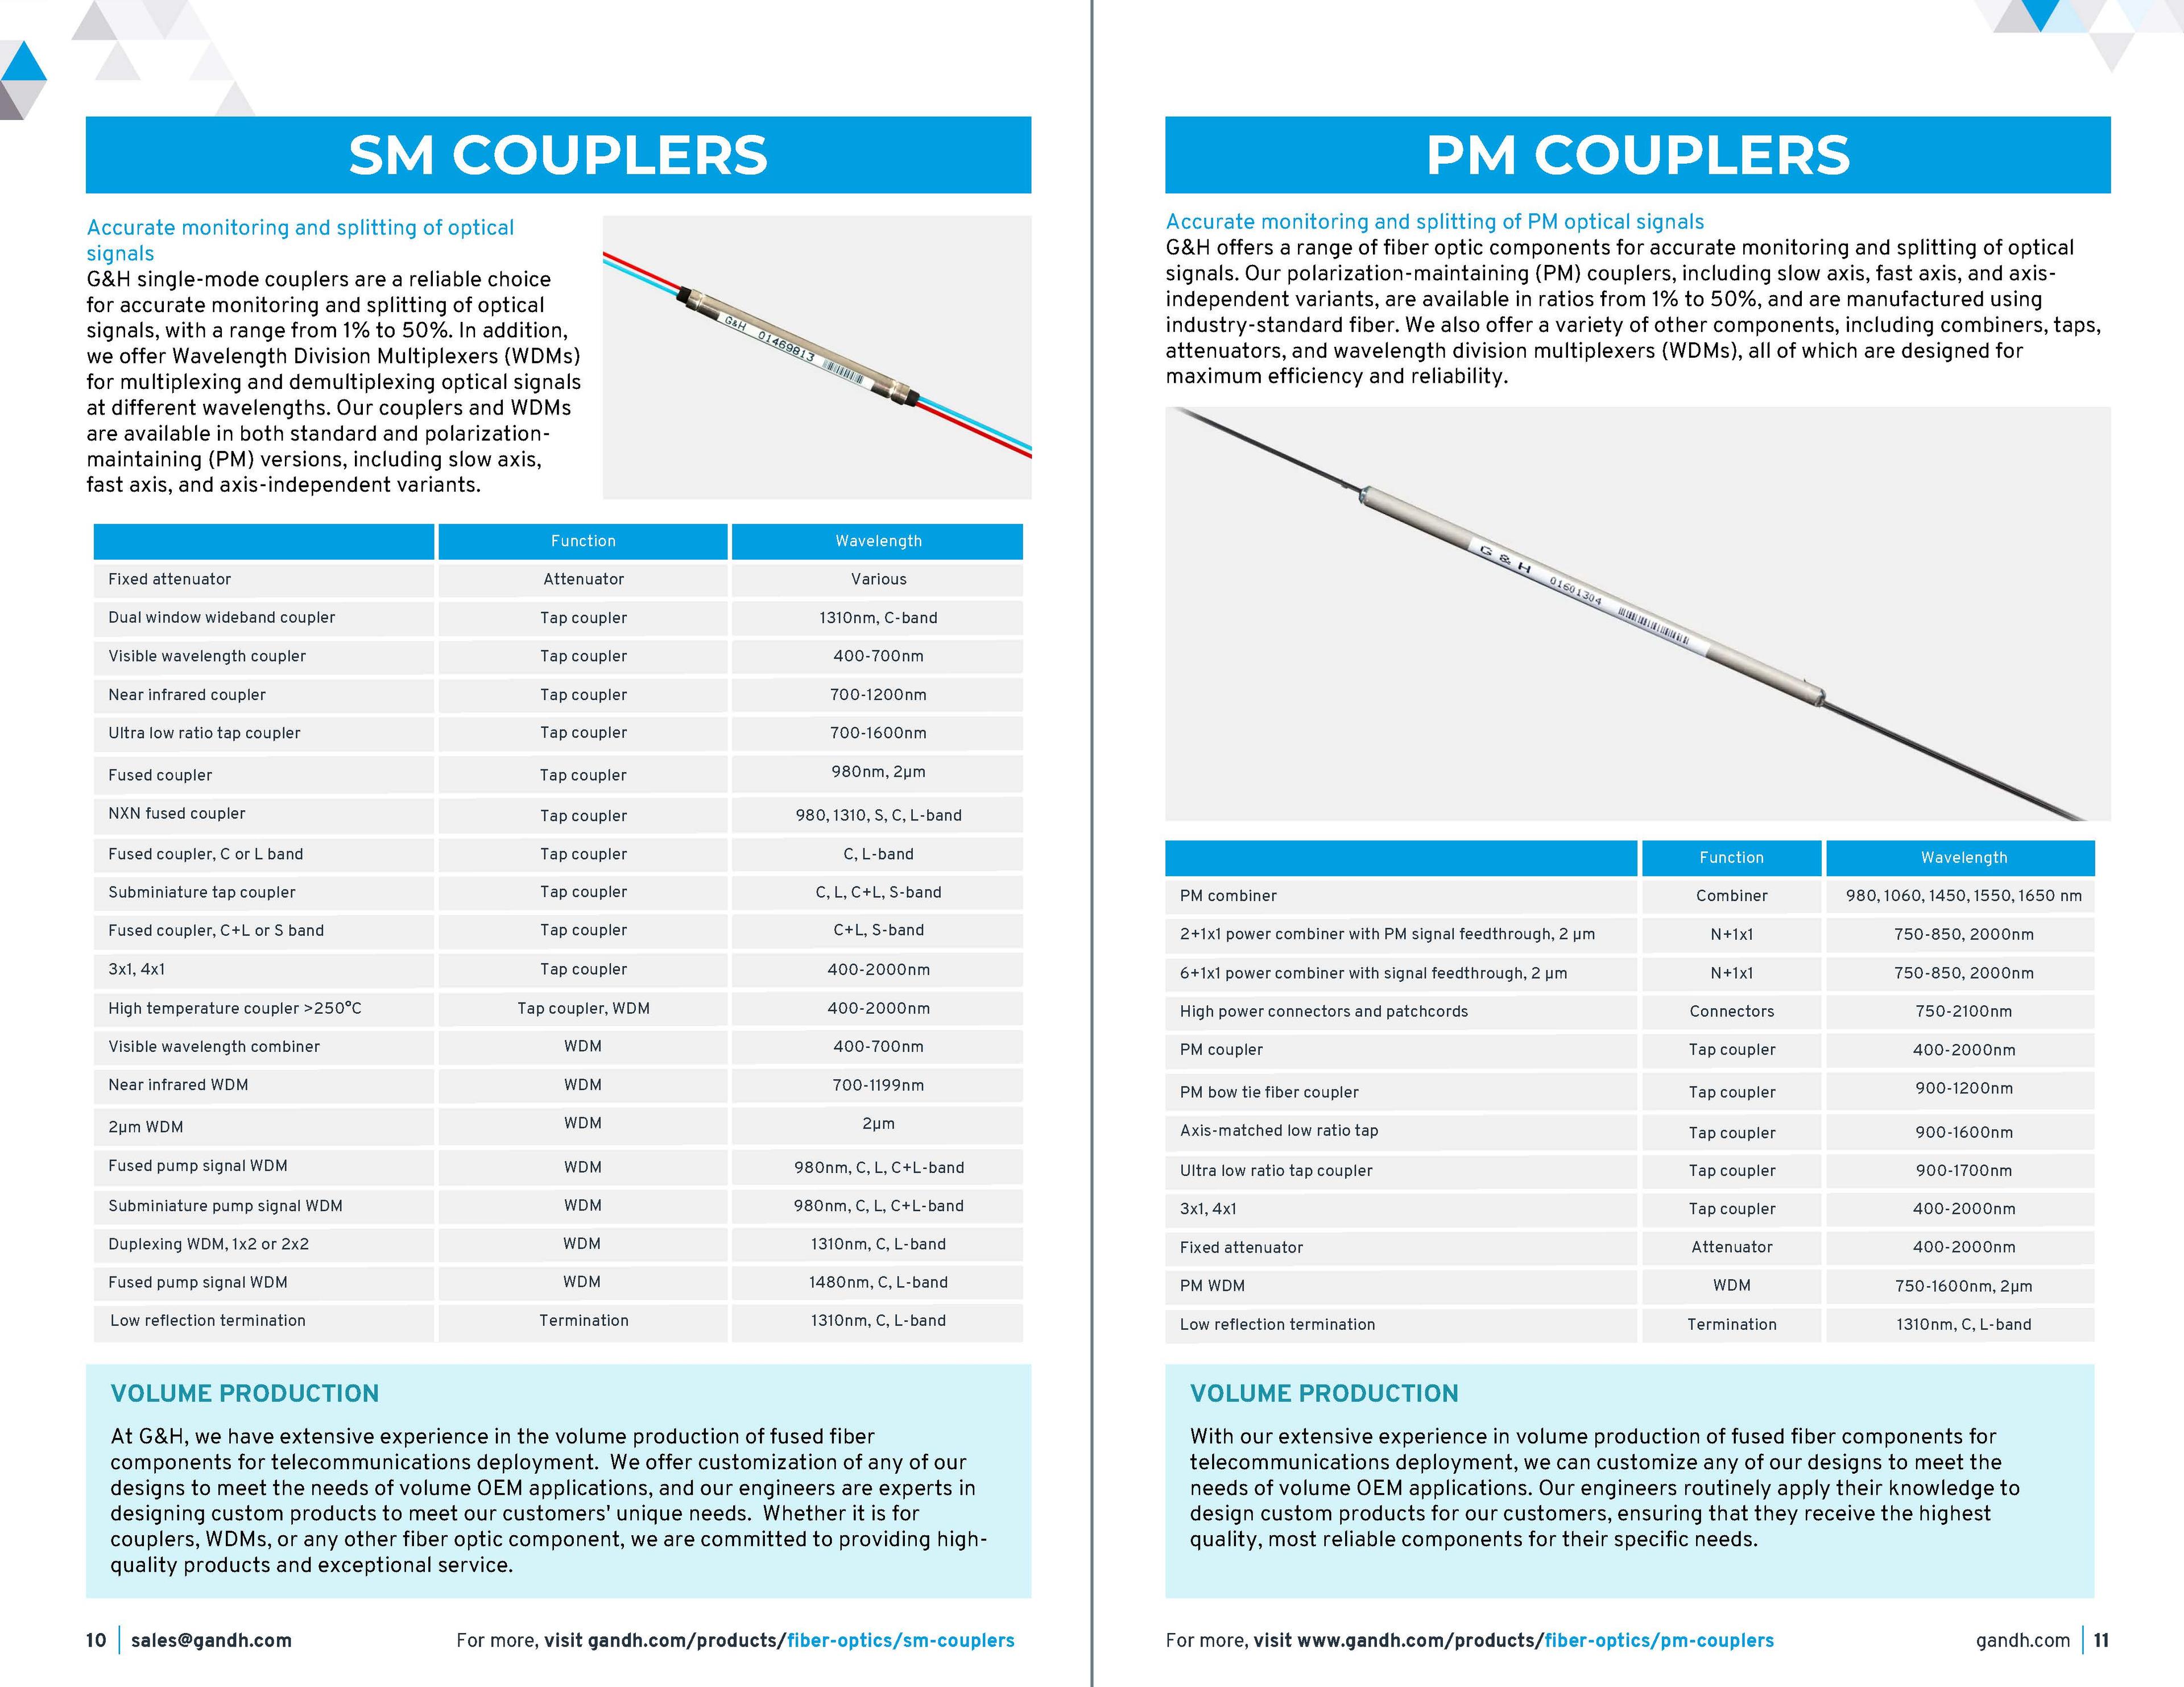 G&H Product & Solutions Guide - Fiber Optics Page 10-11